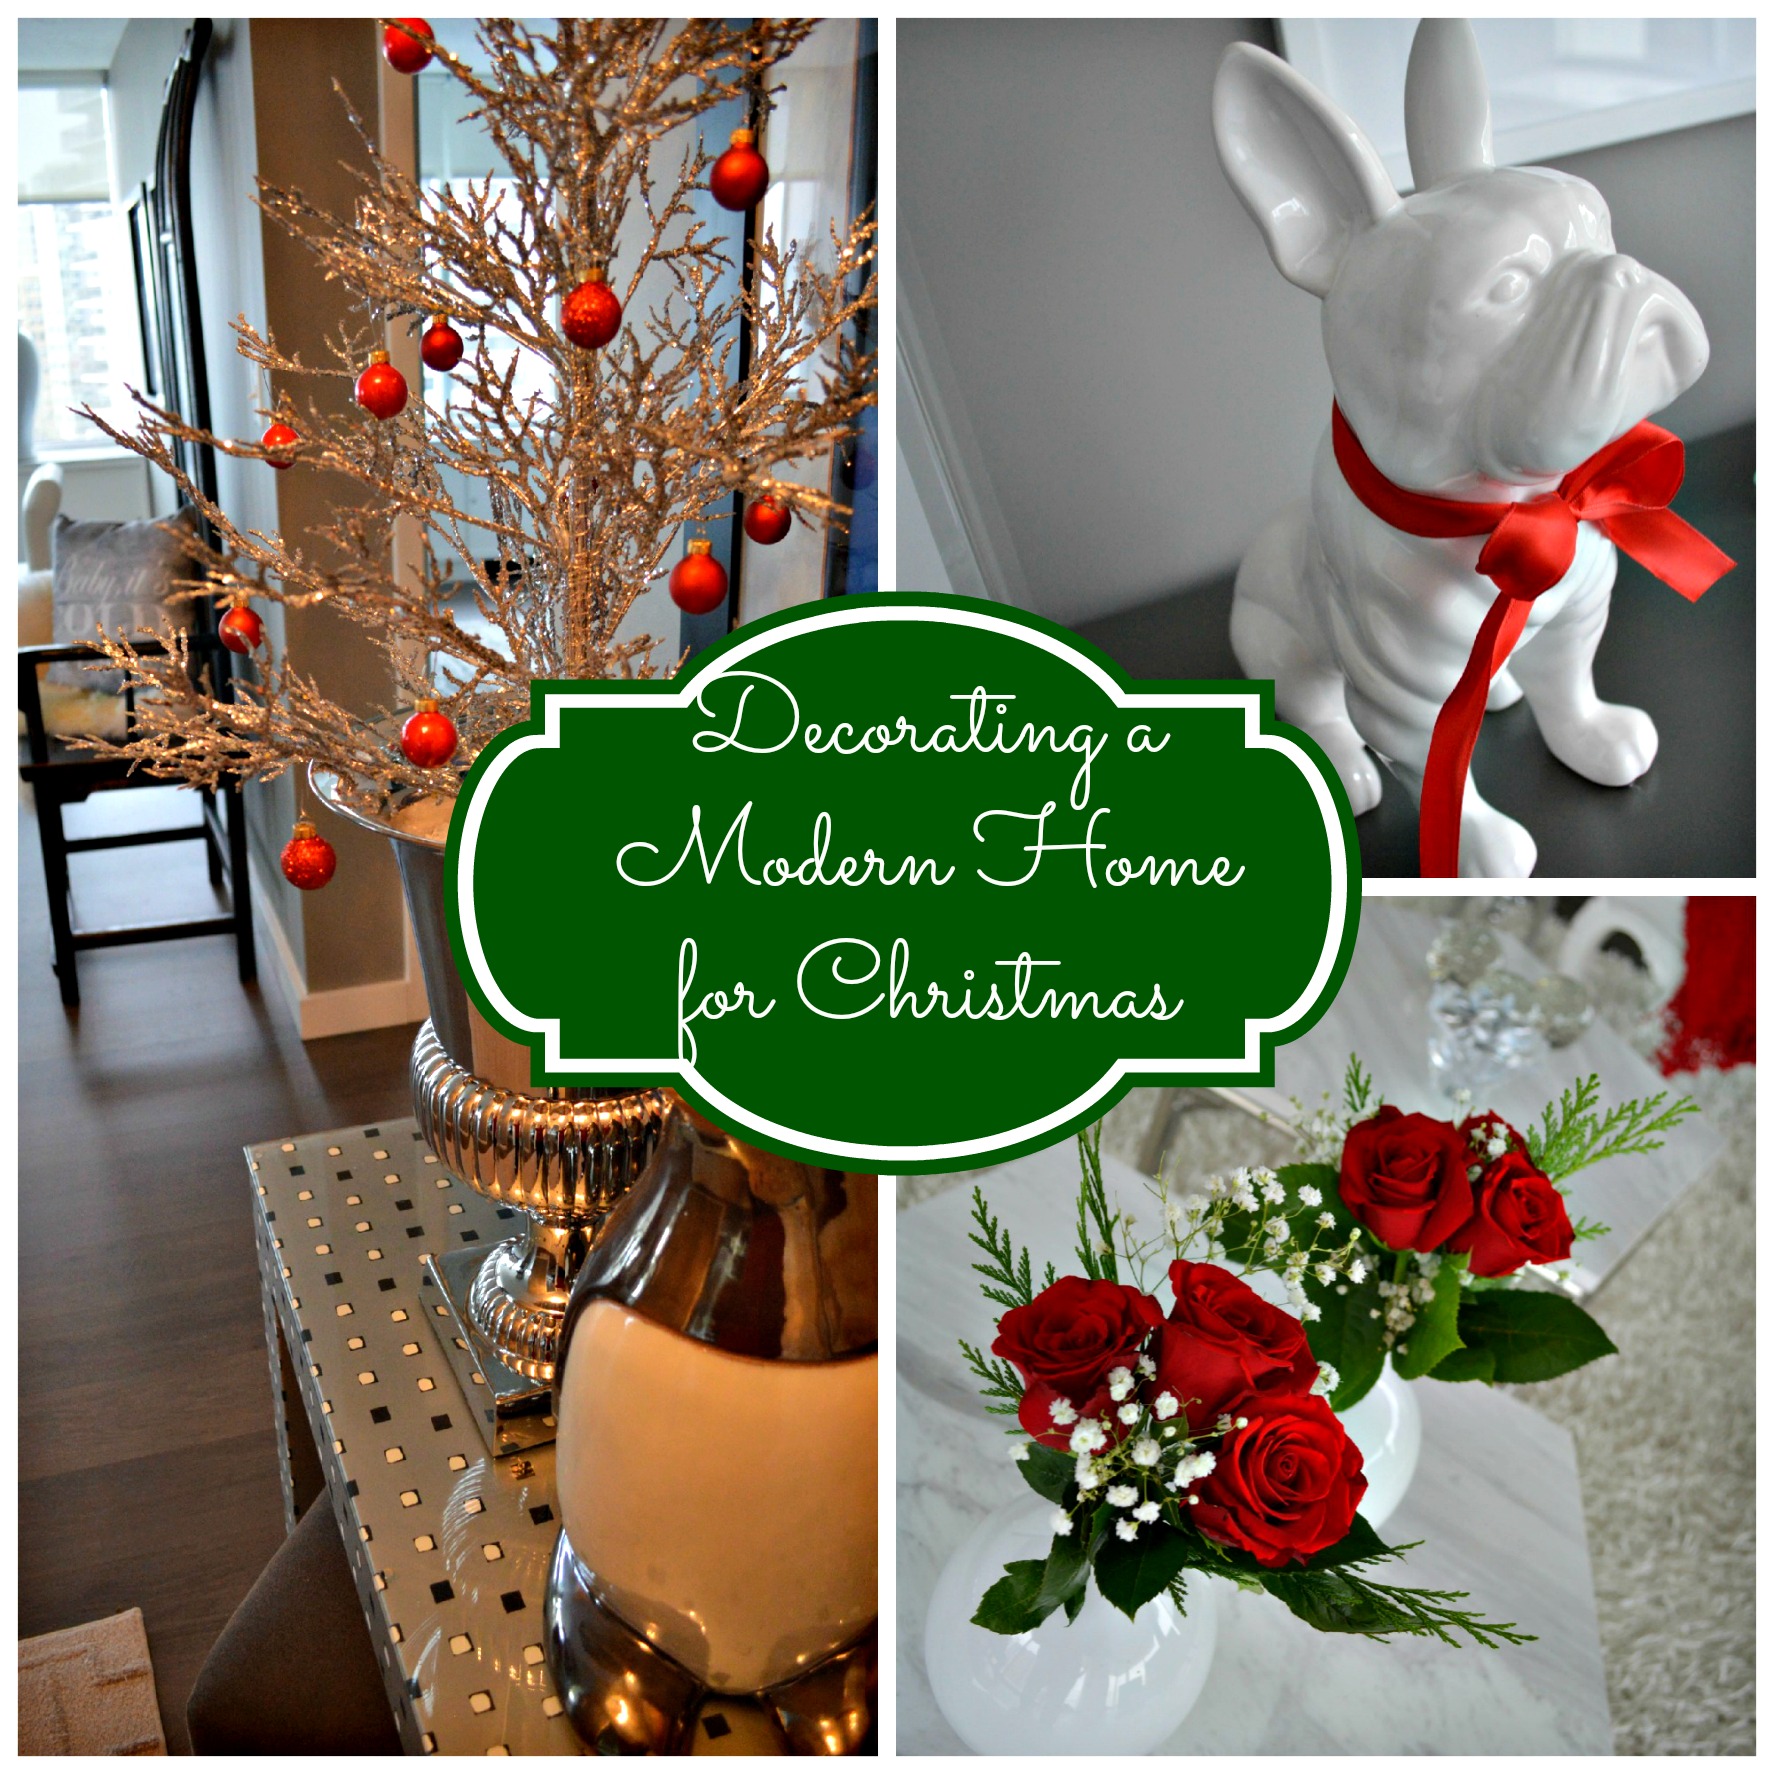 Decorating a Modern Home for Christmas